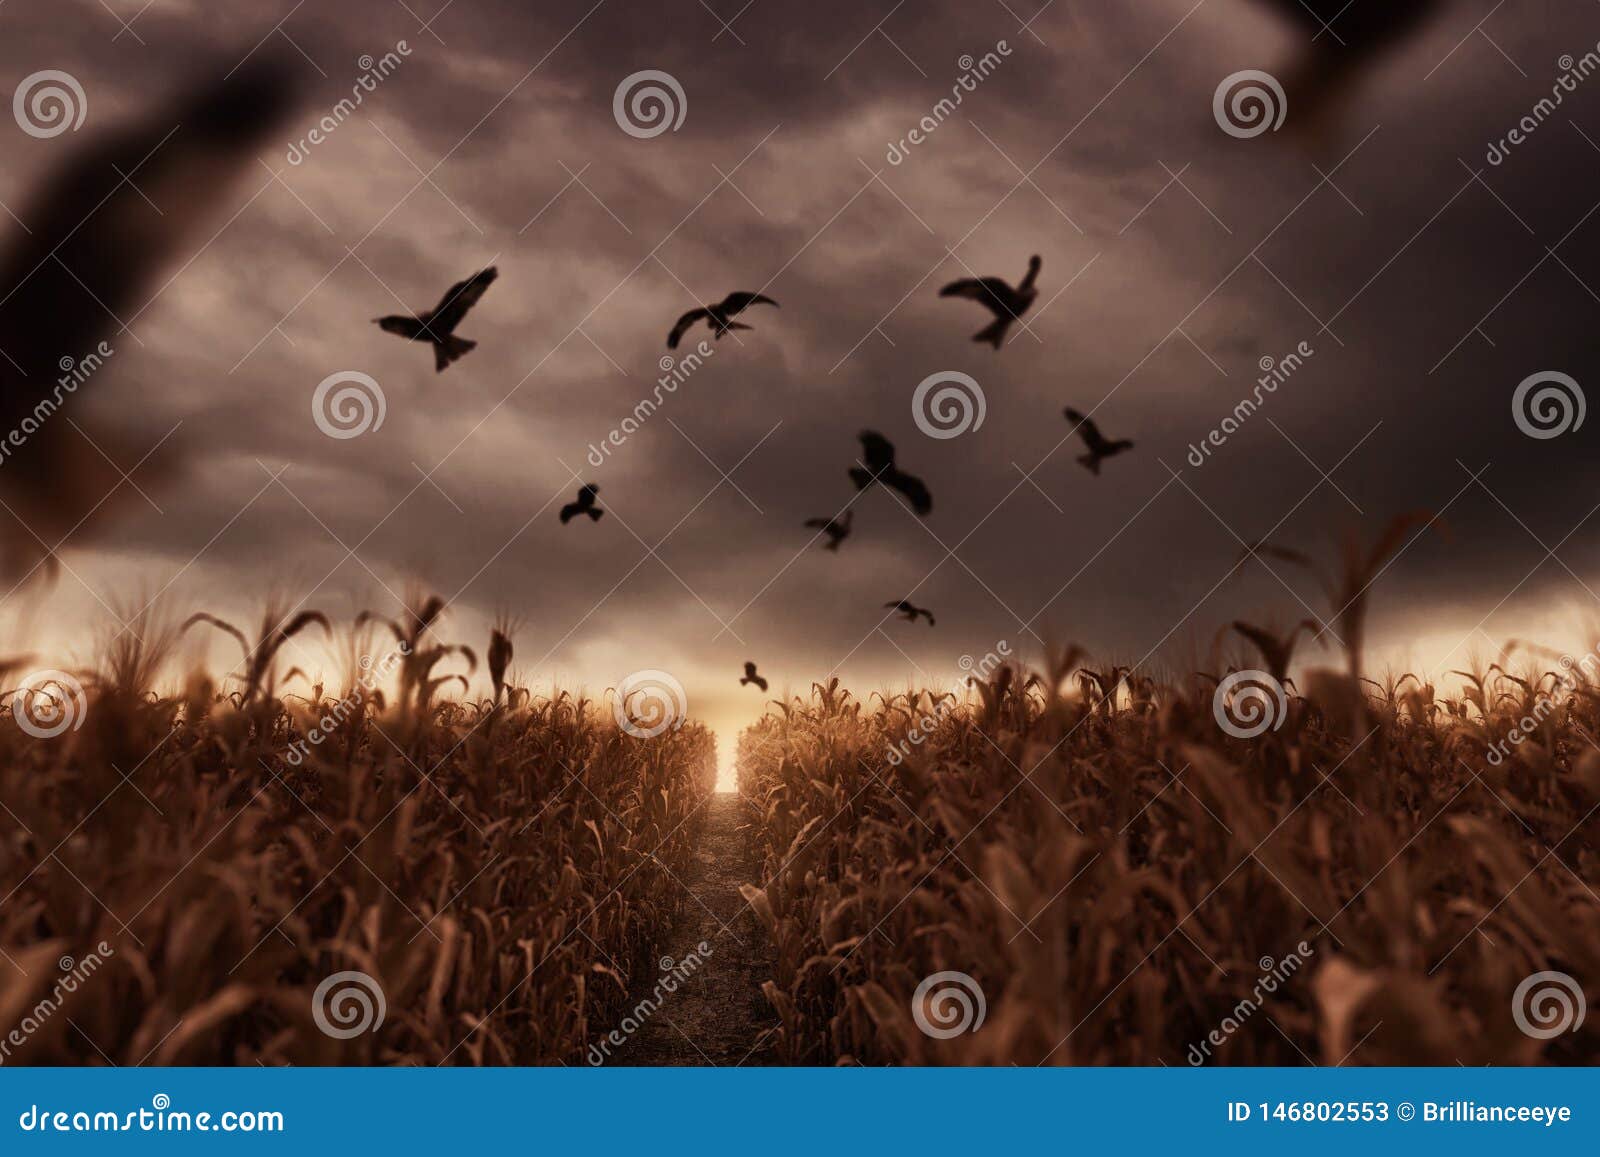 withered cornfield with flying birds in the apocalyptic mood